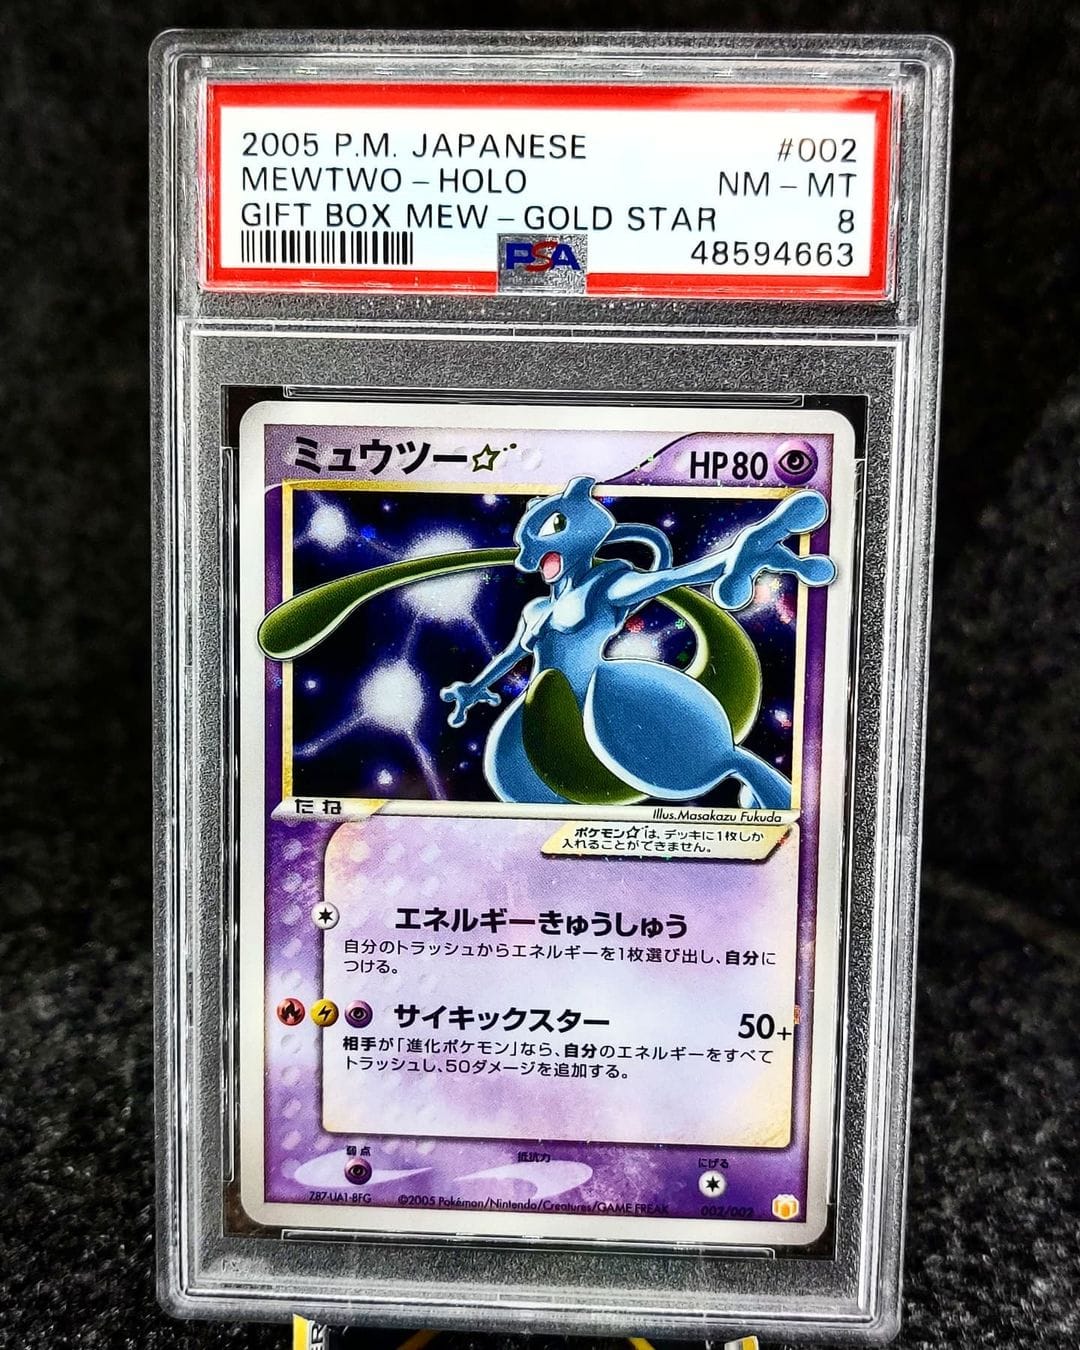 Are Japanese Pokemon cards worth anything? Price guide and top collectibles